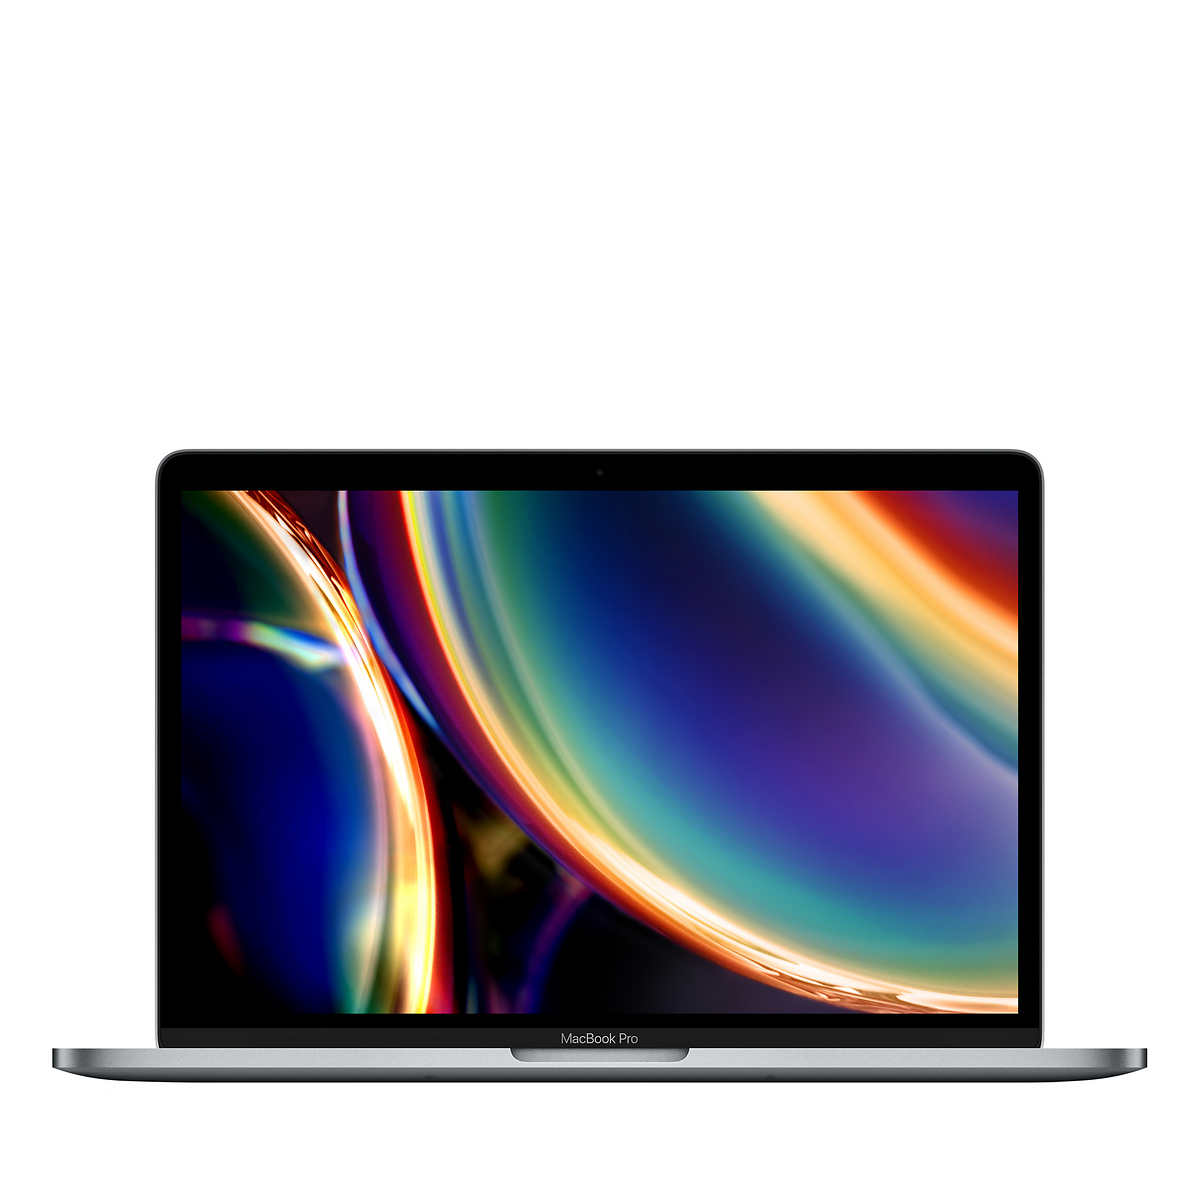 Apple Macbook Pro 13 3 With Touch Bar 8th Gen Intel Core I5 8gb Memory 256gb Ssd Space Gray